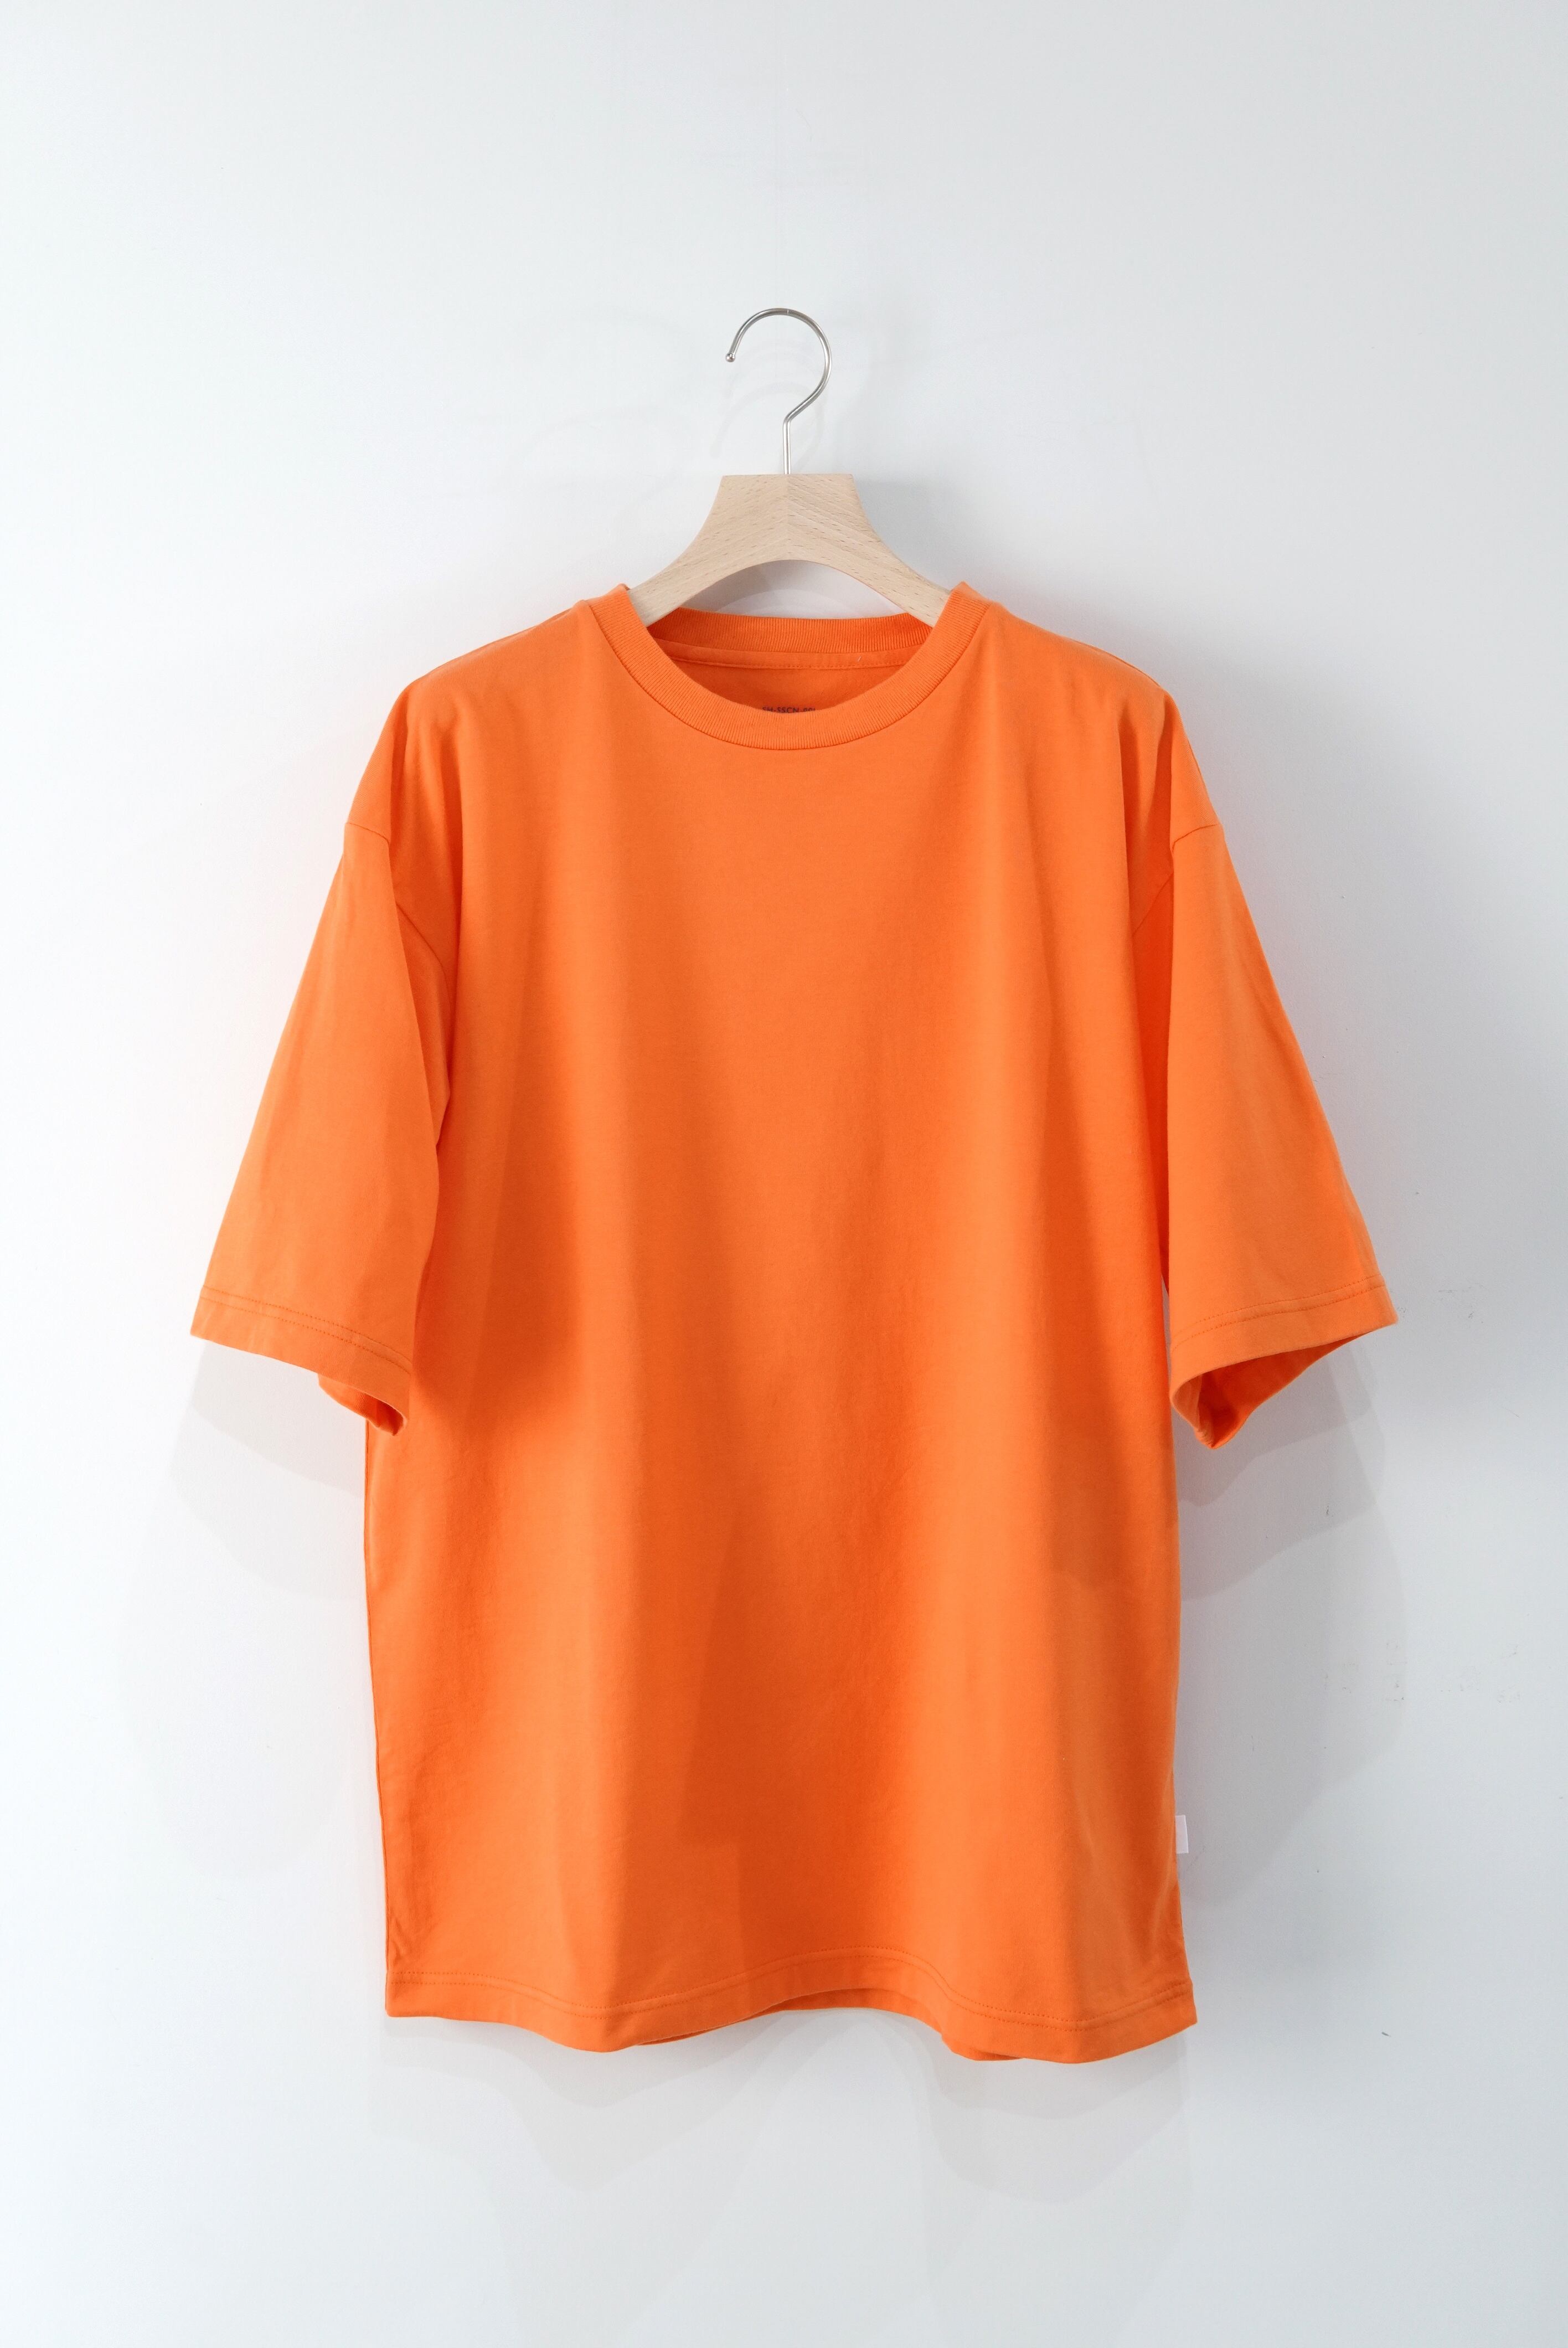 S H / S/S T SHIRTS